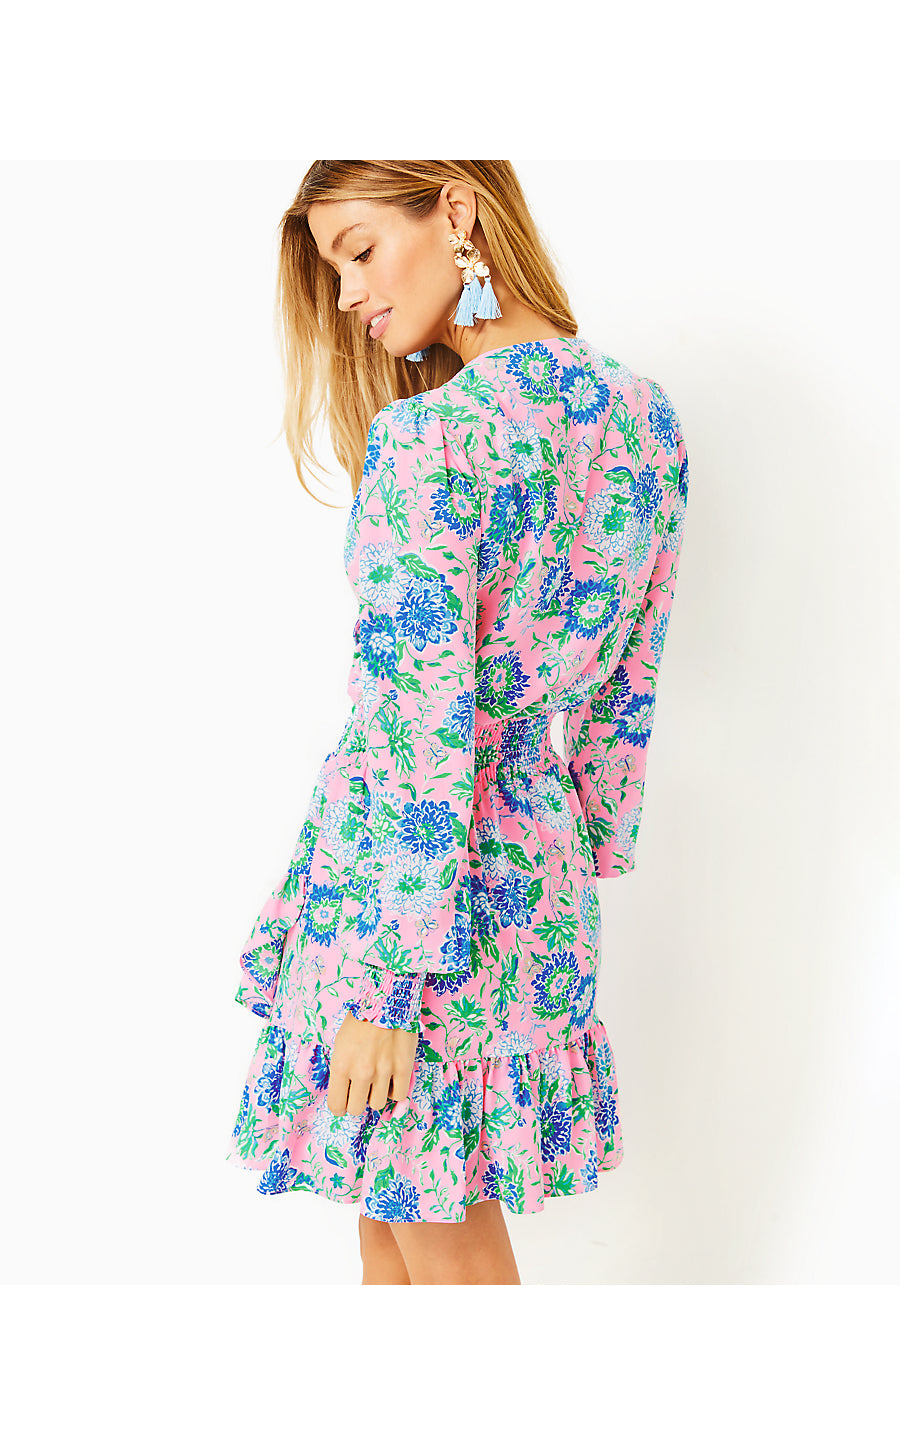 CRISTIANA LONG SLEEVE STRETCH DRESS, CONCH SHELL PINK RUMOR HAS IT